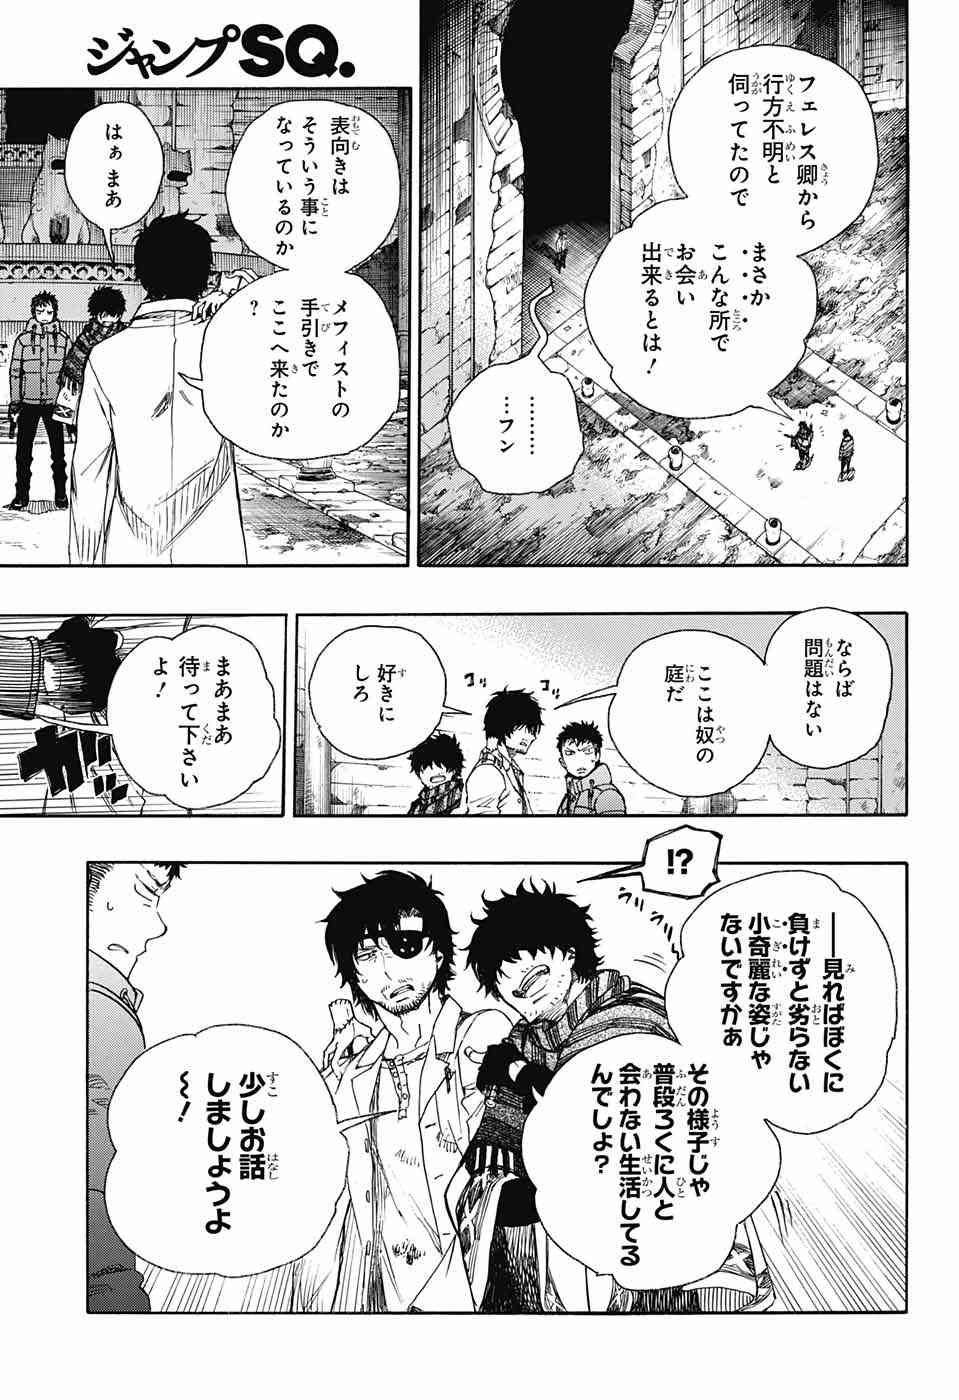 Ao no Exorcist - Chapter 85 - Page 3